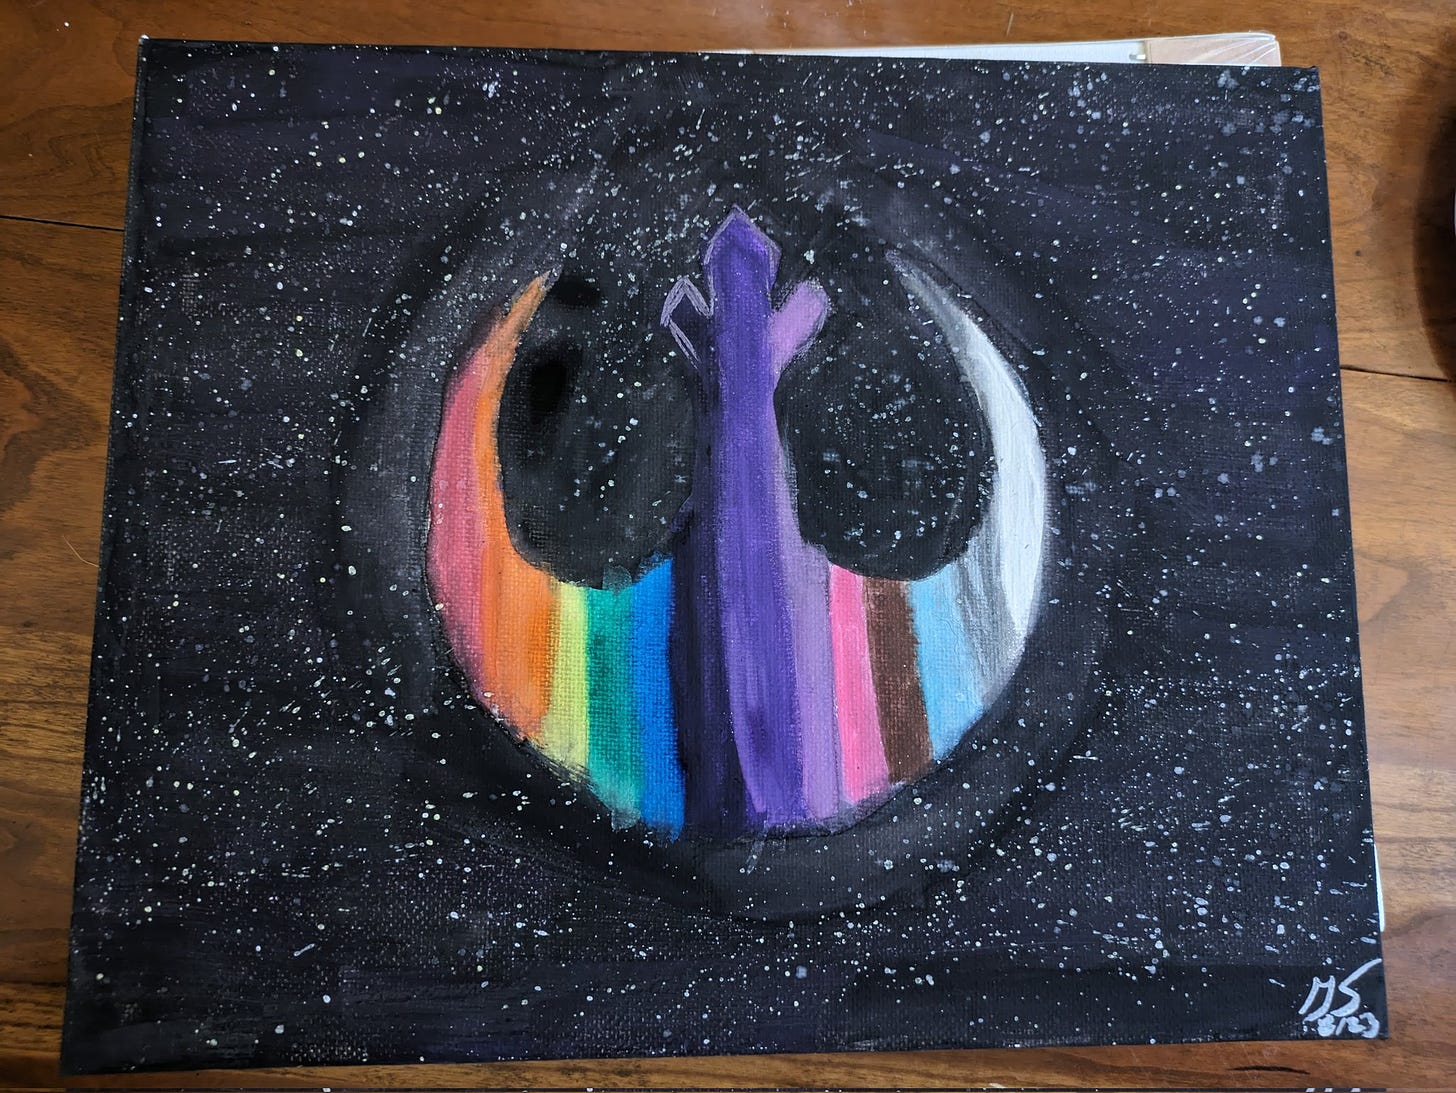 A painting of a rebel alliance symbol with rainbow and trans colors set against a starry background 